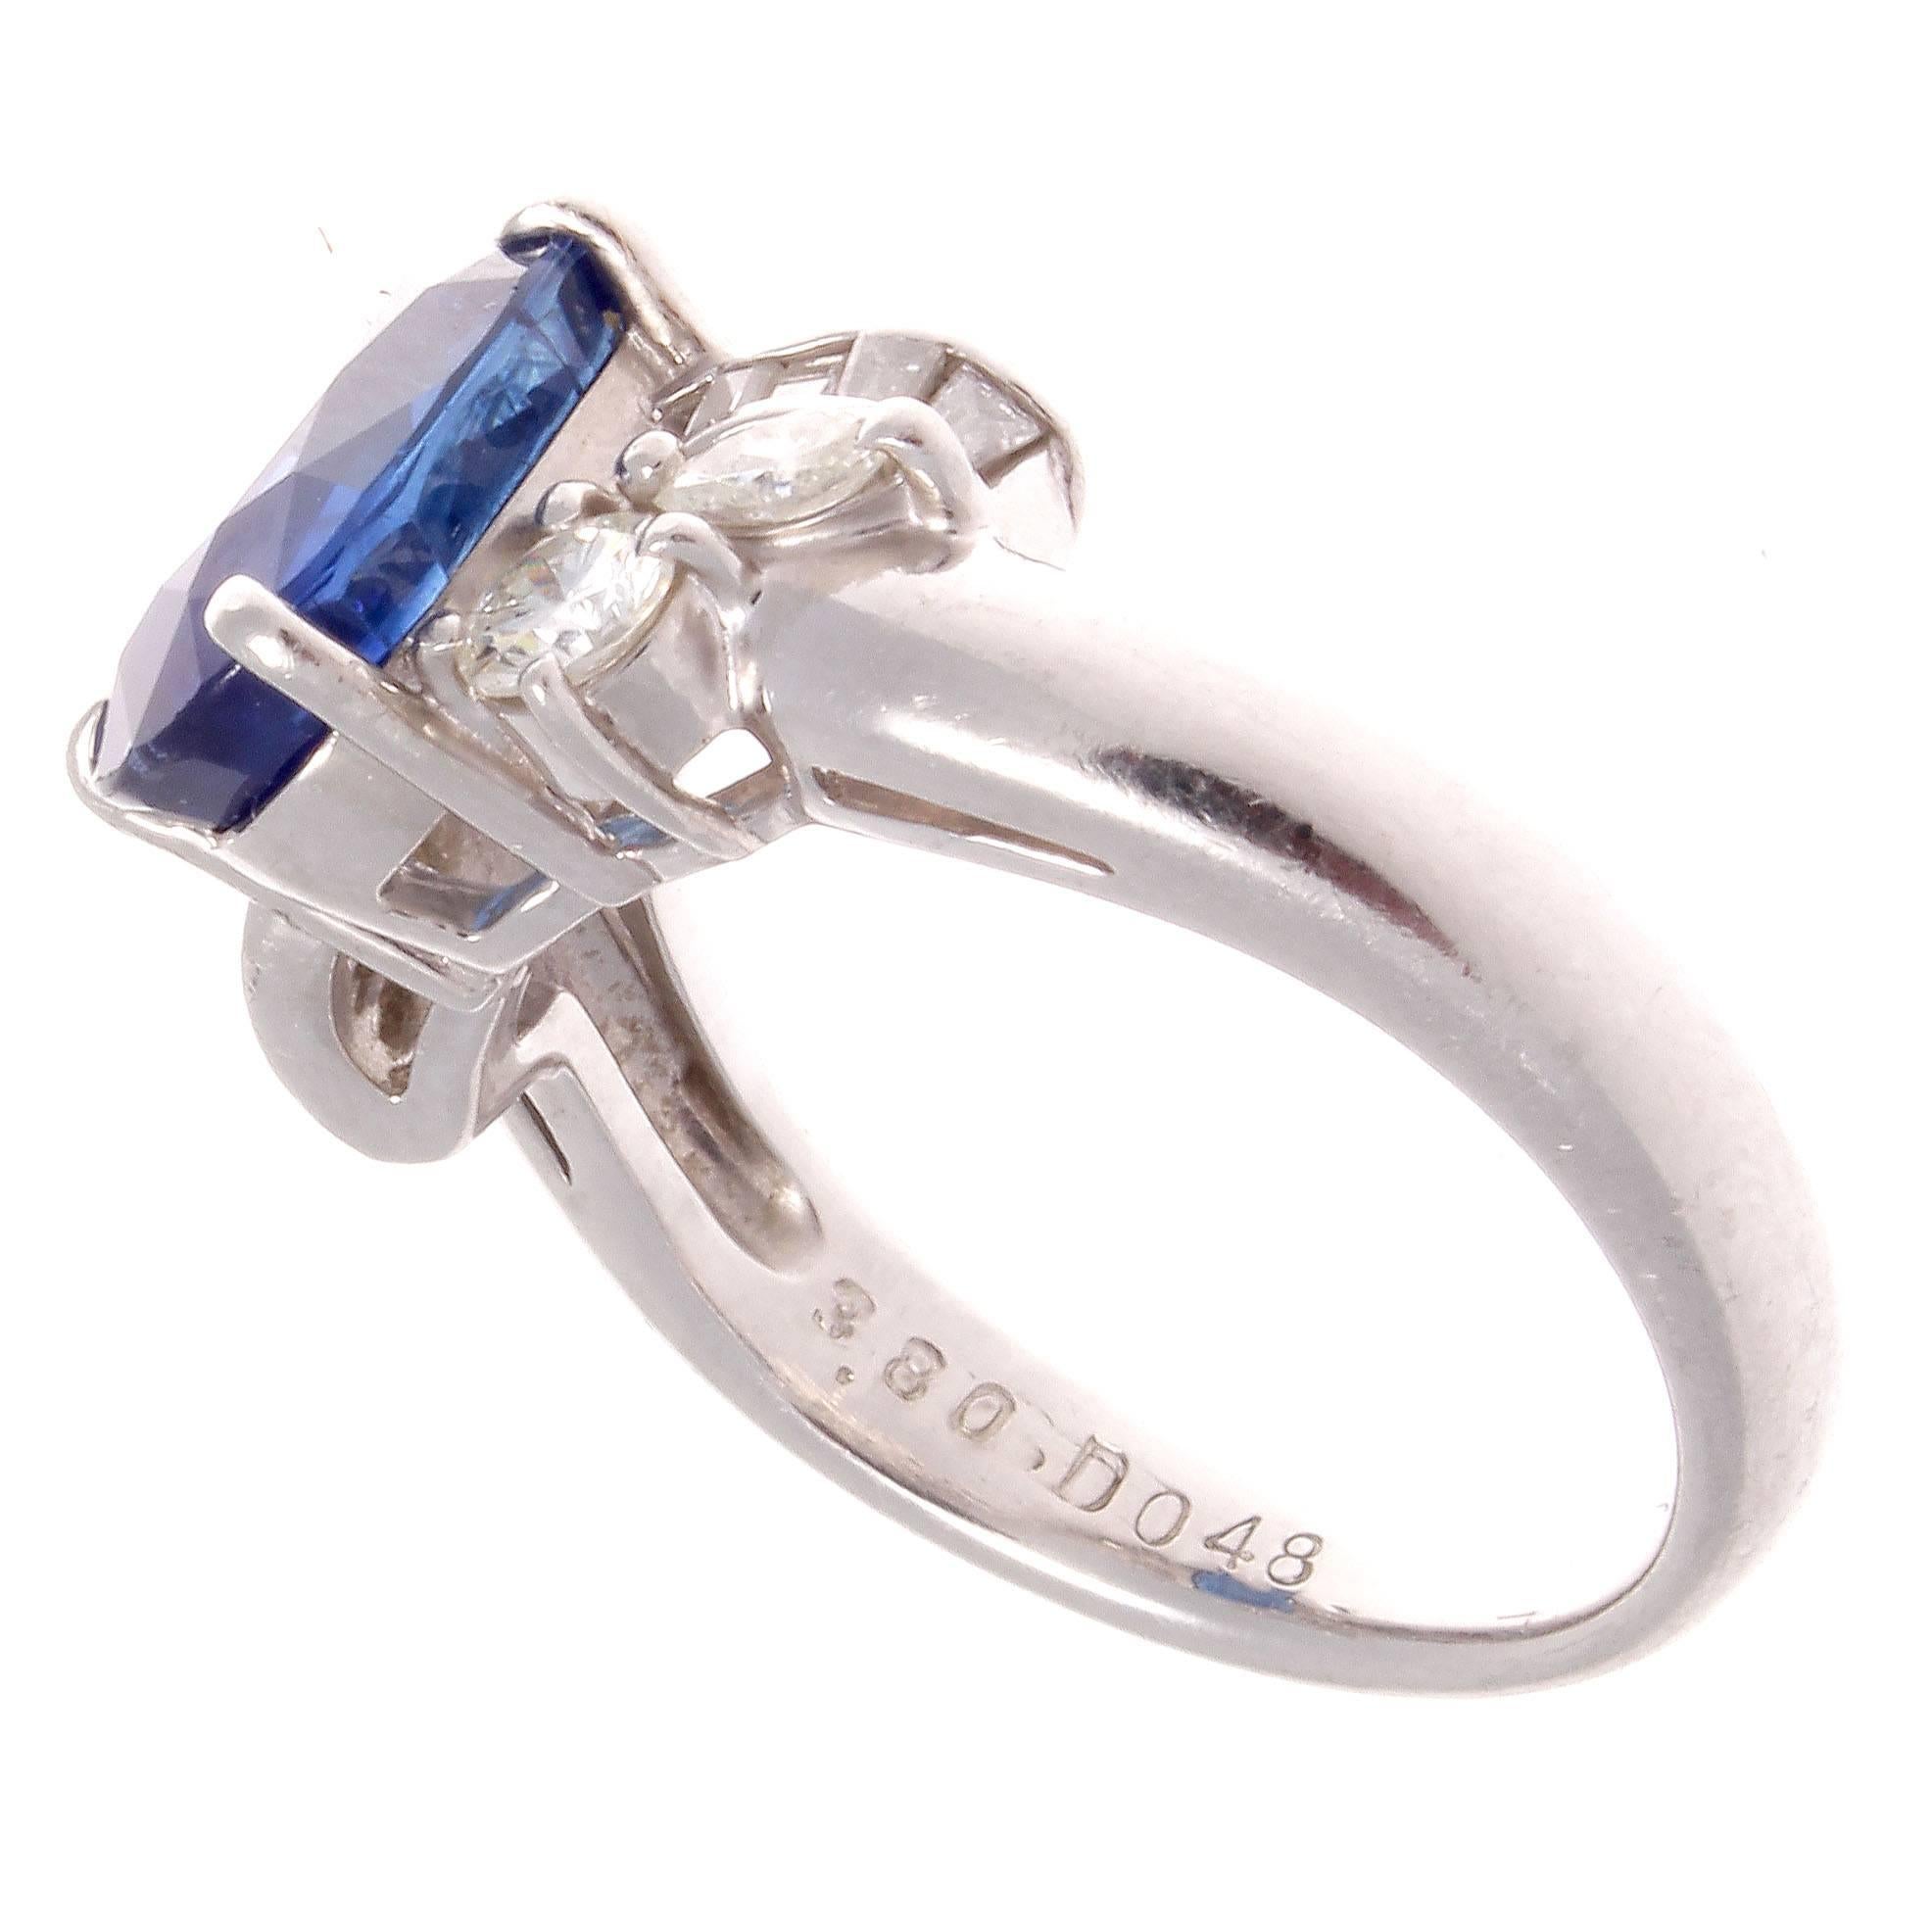 Serenity through color and design. Featuring a 3.80 carat royal blue sapphire that is accented by flowing lines of white clean diamonds on either side weighing 0.48 carats. Crafted in platinum.

Ring size 6 and may be resized